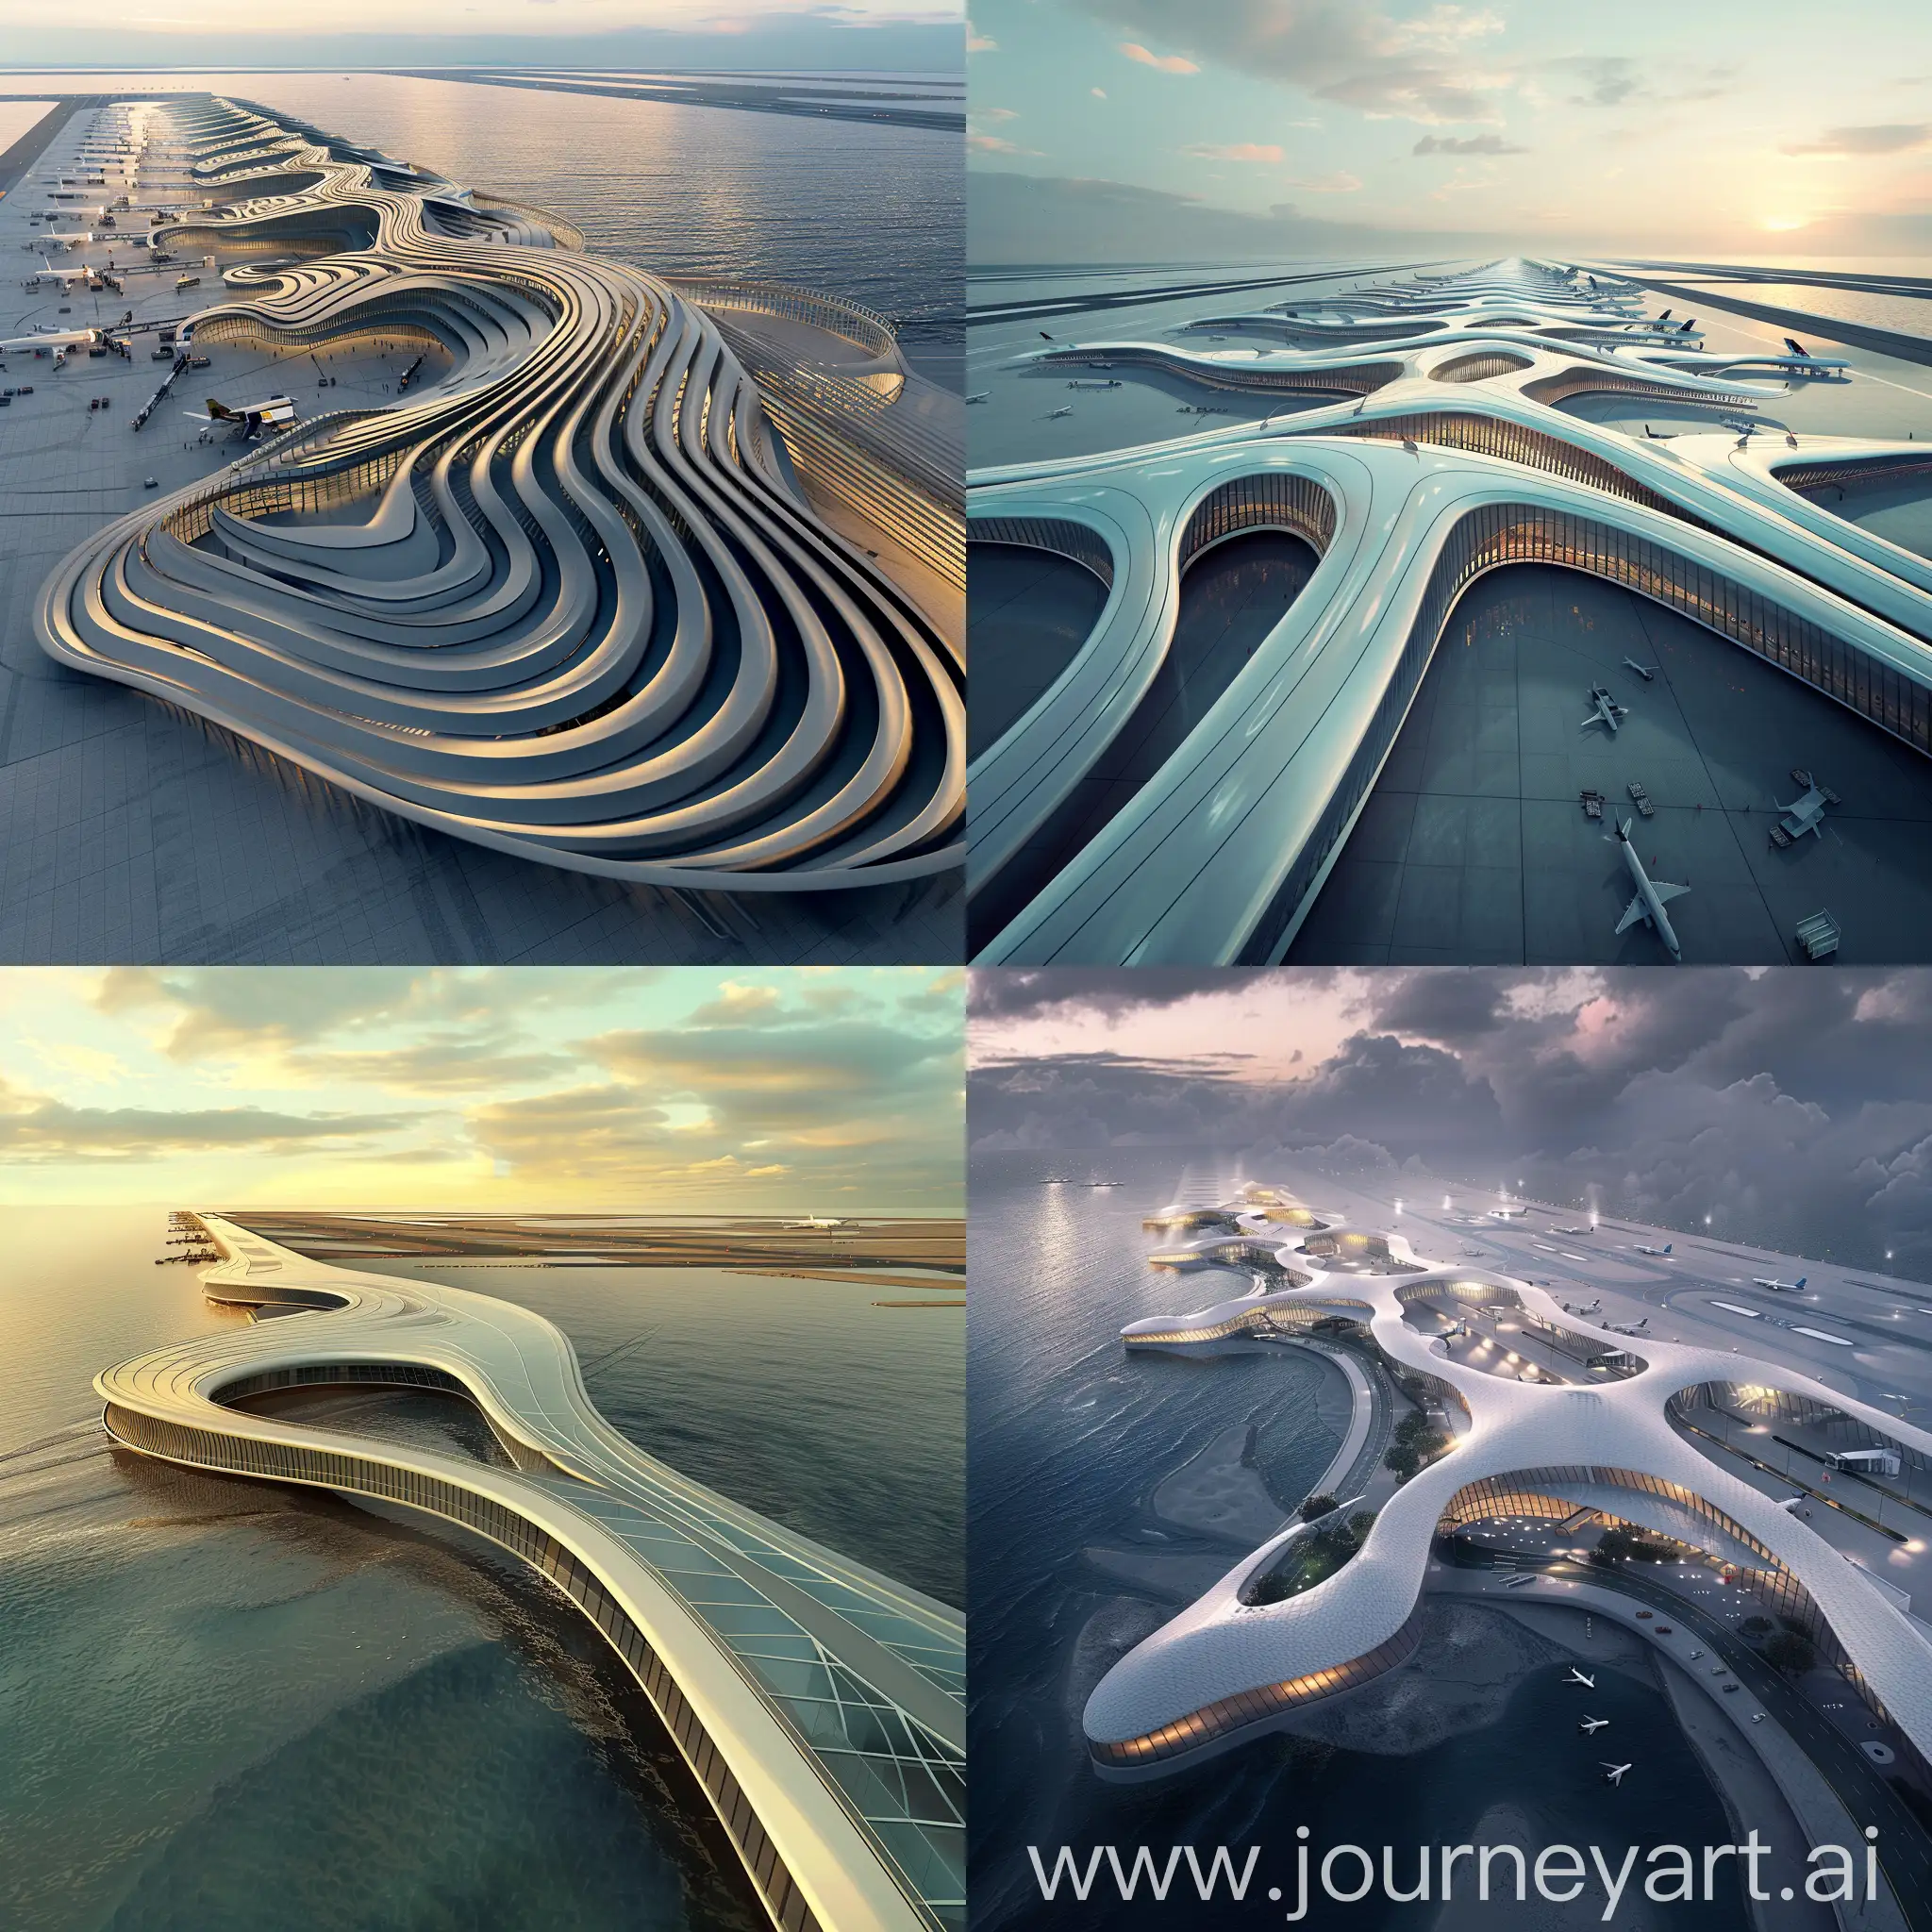 design a linear airport terminal that mimics the undulating waves of the ocean, with its curvilinear structure and mesmerizing aerial view.